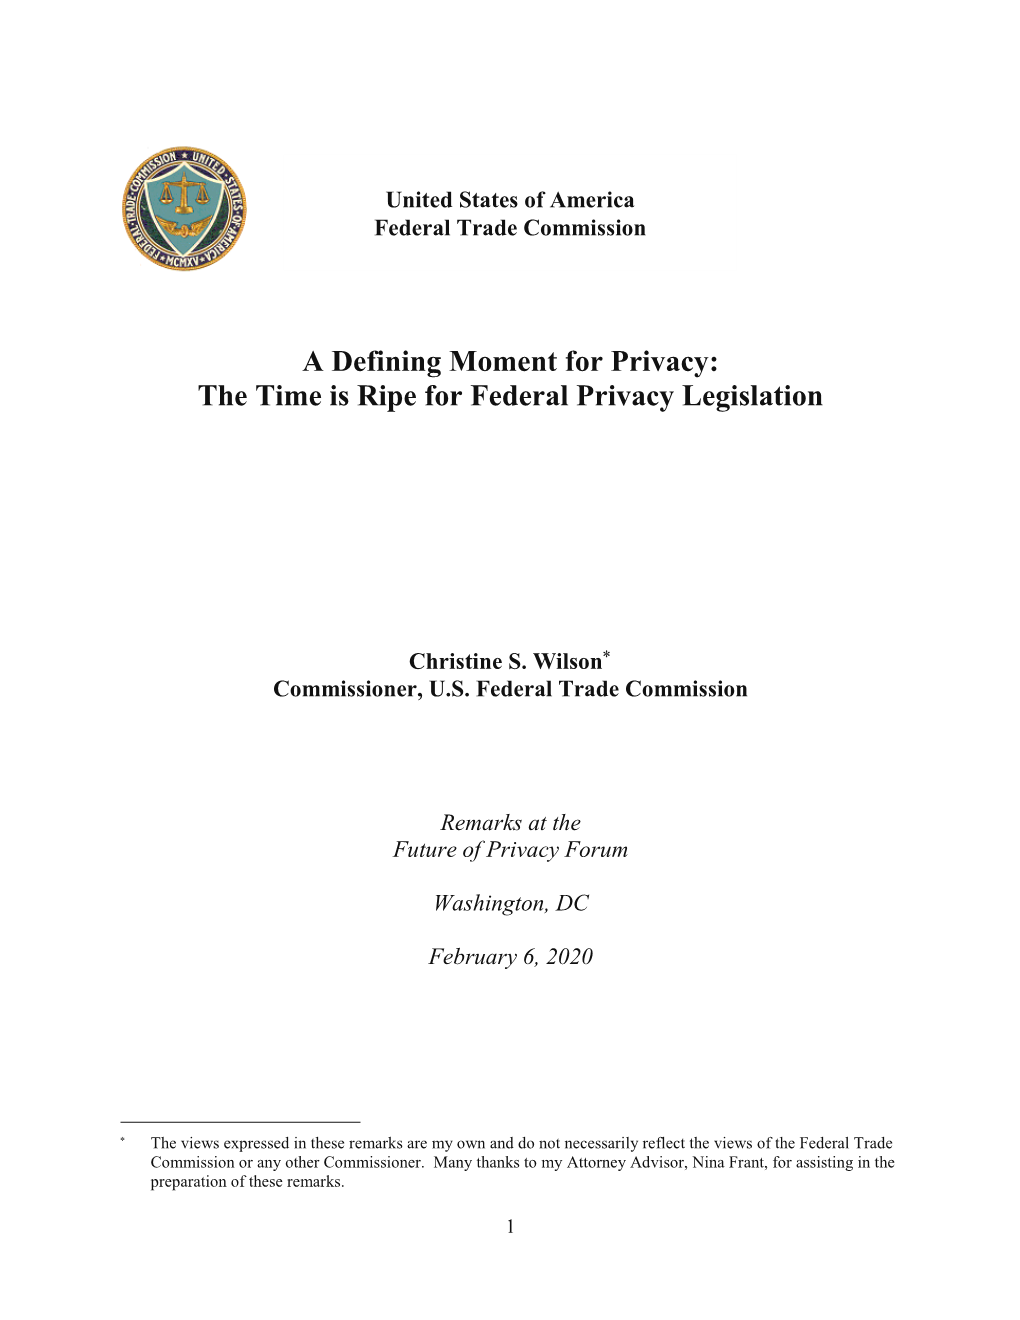 The Time Is Ripe for Federal Privacy Legislation